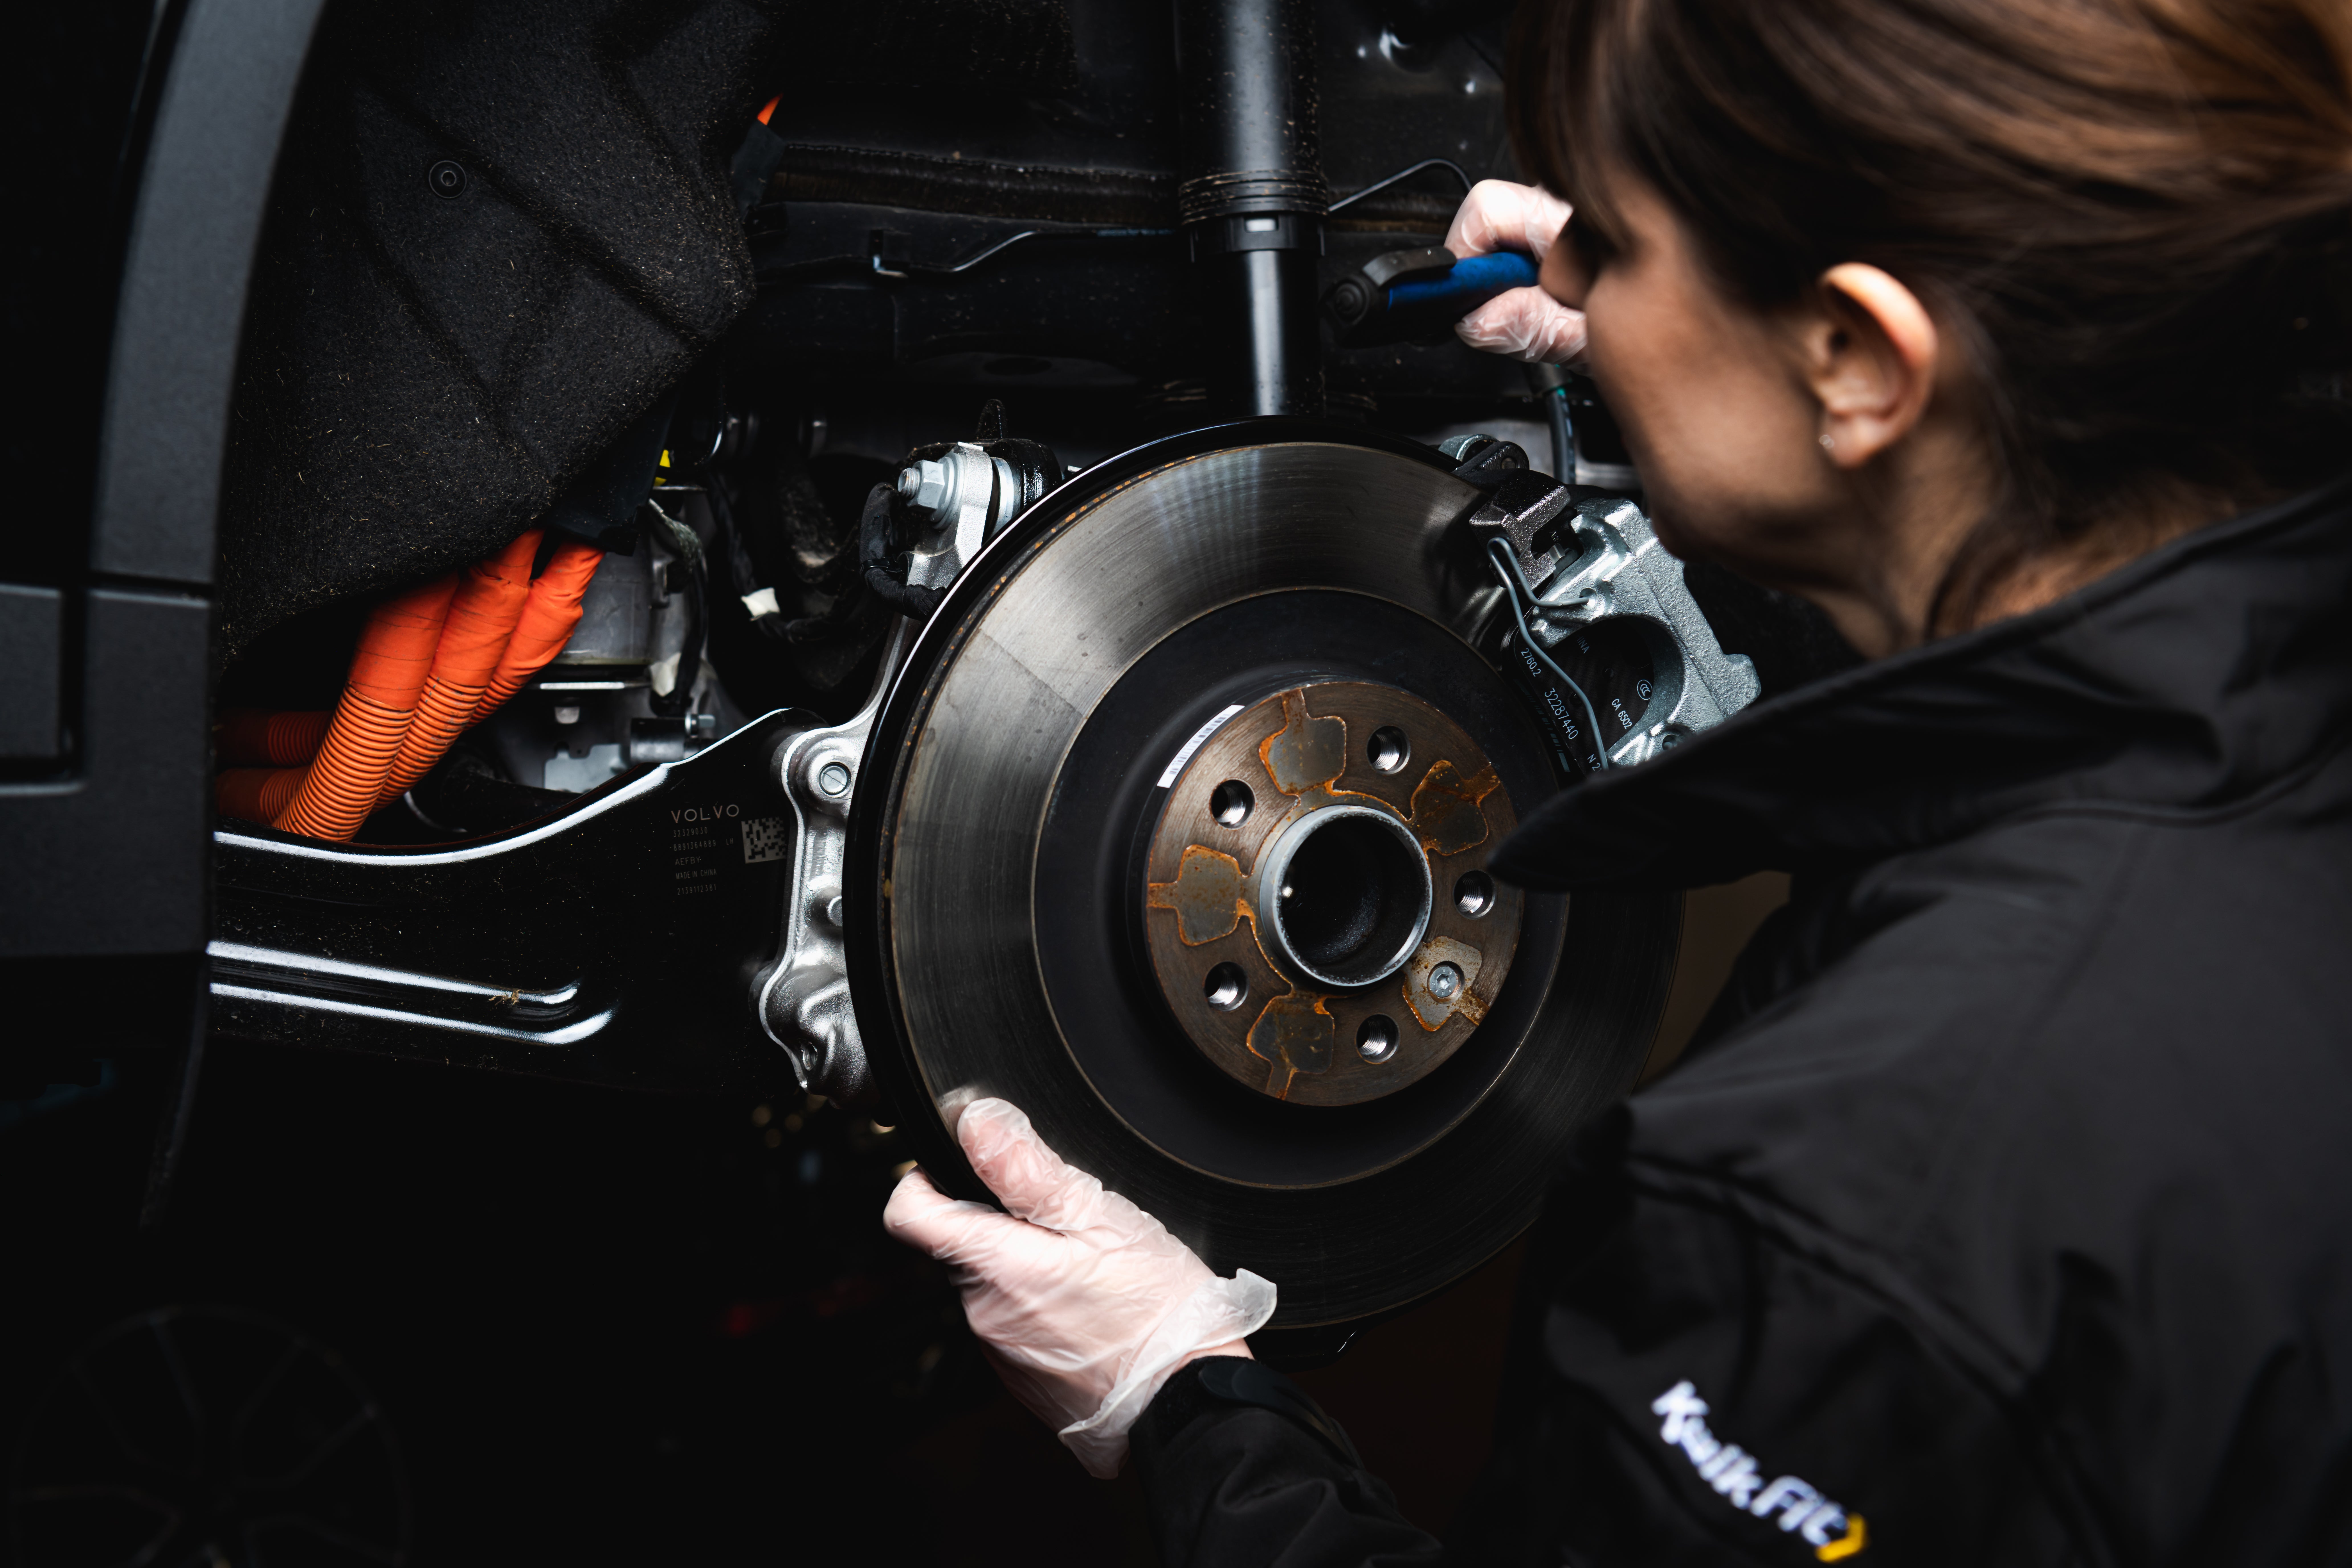 With an Outstanding Ofsted rating and a guaranteed job for successful participants, the Kwik Fit apprenticeship scheme is a fantastic route into the industry